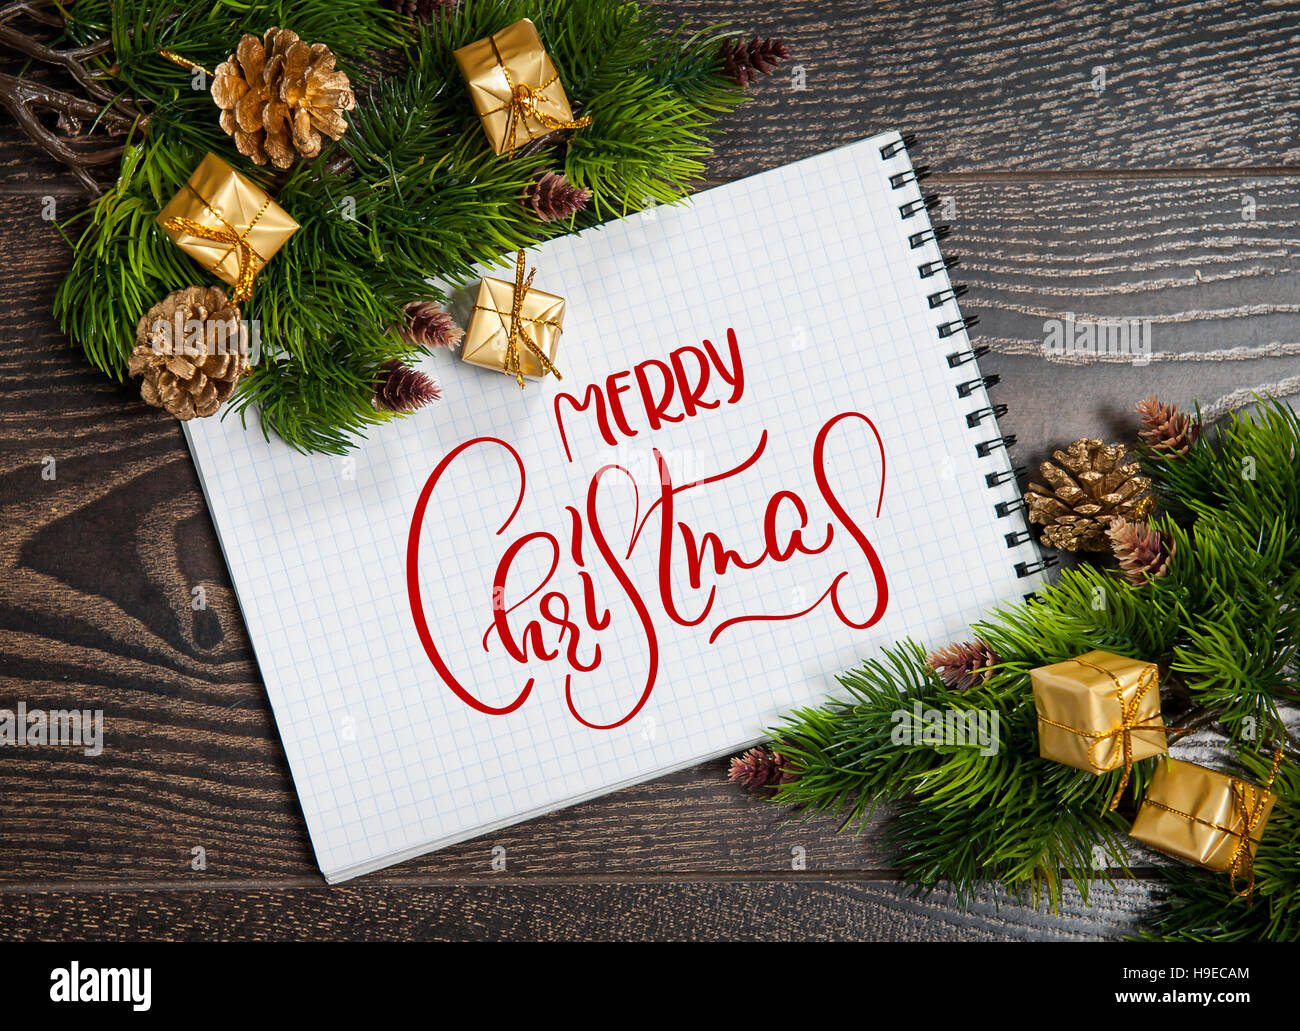 Holiday blank note with text Merry Christmas. Calligraphy and lettering Stock Photo